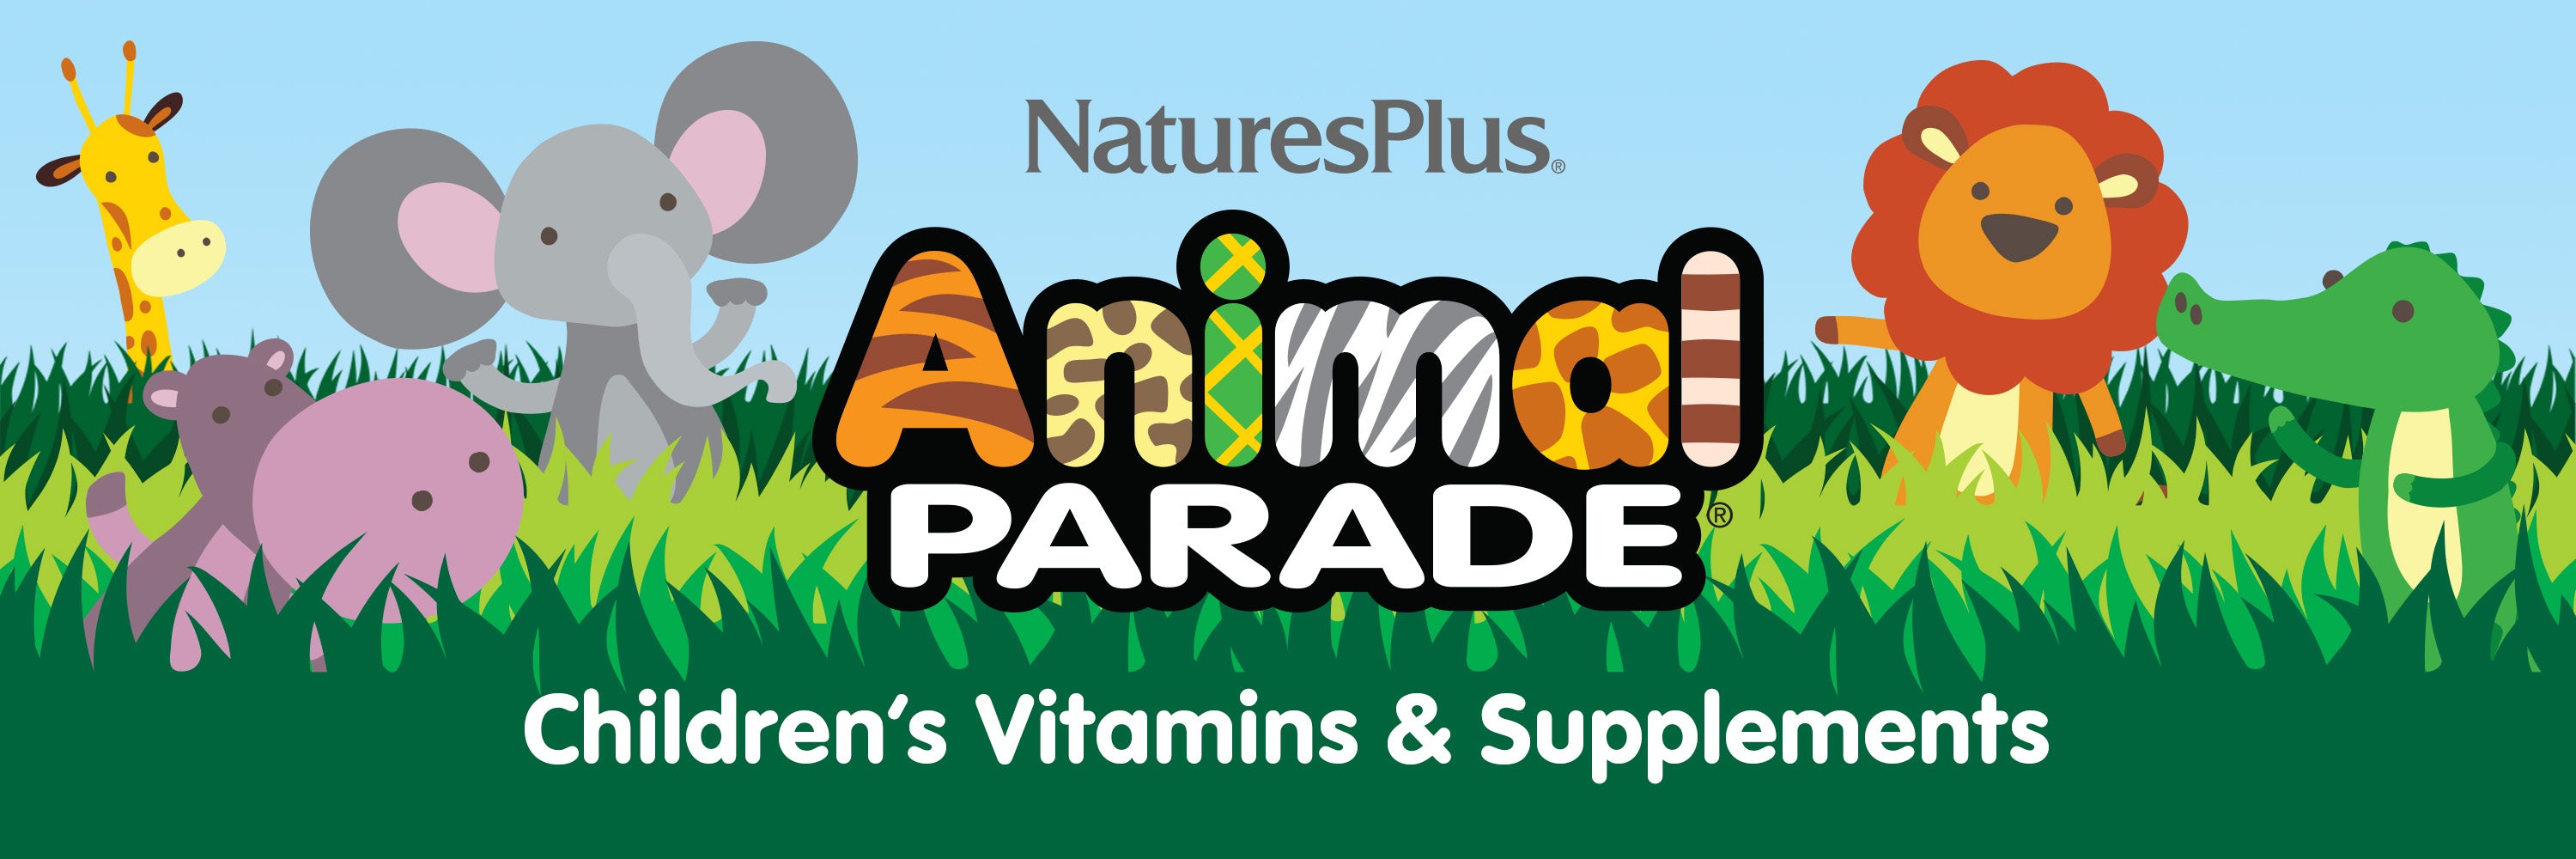 Animal Parade collection image banner